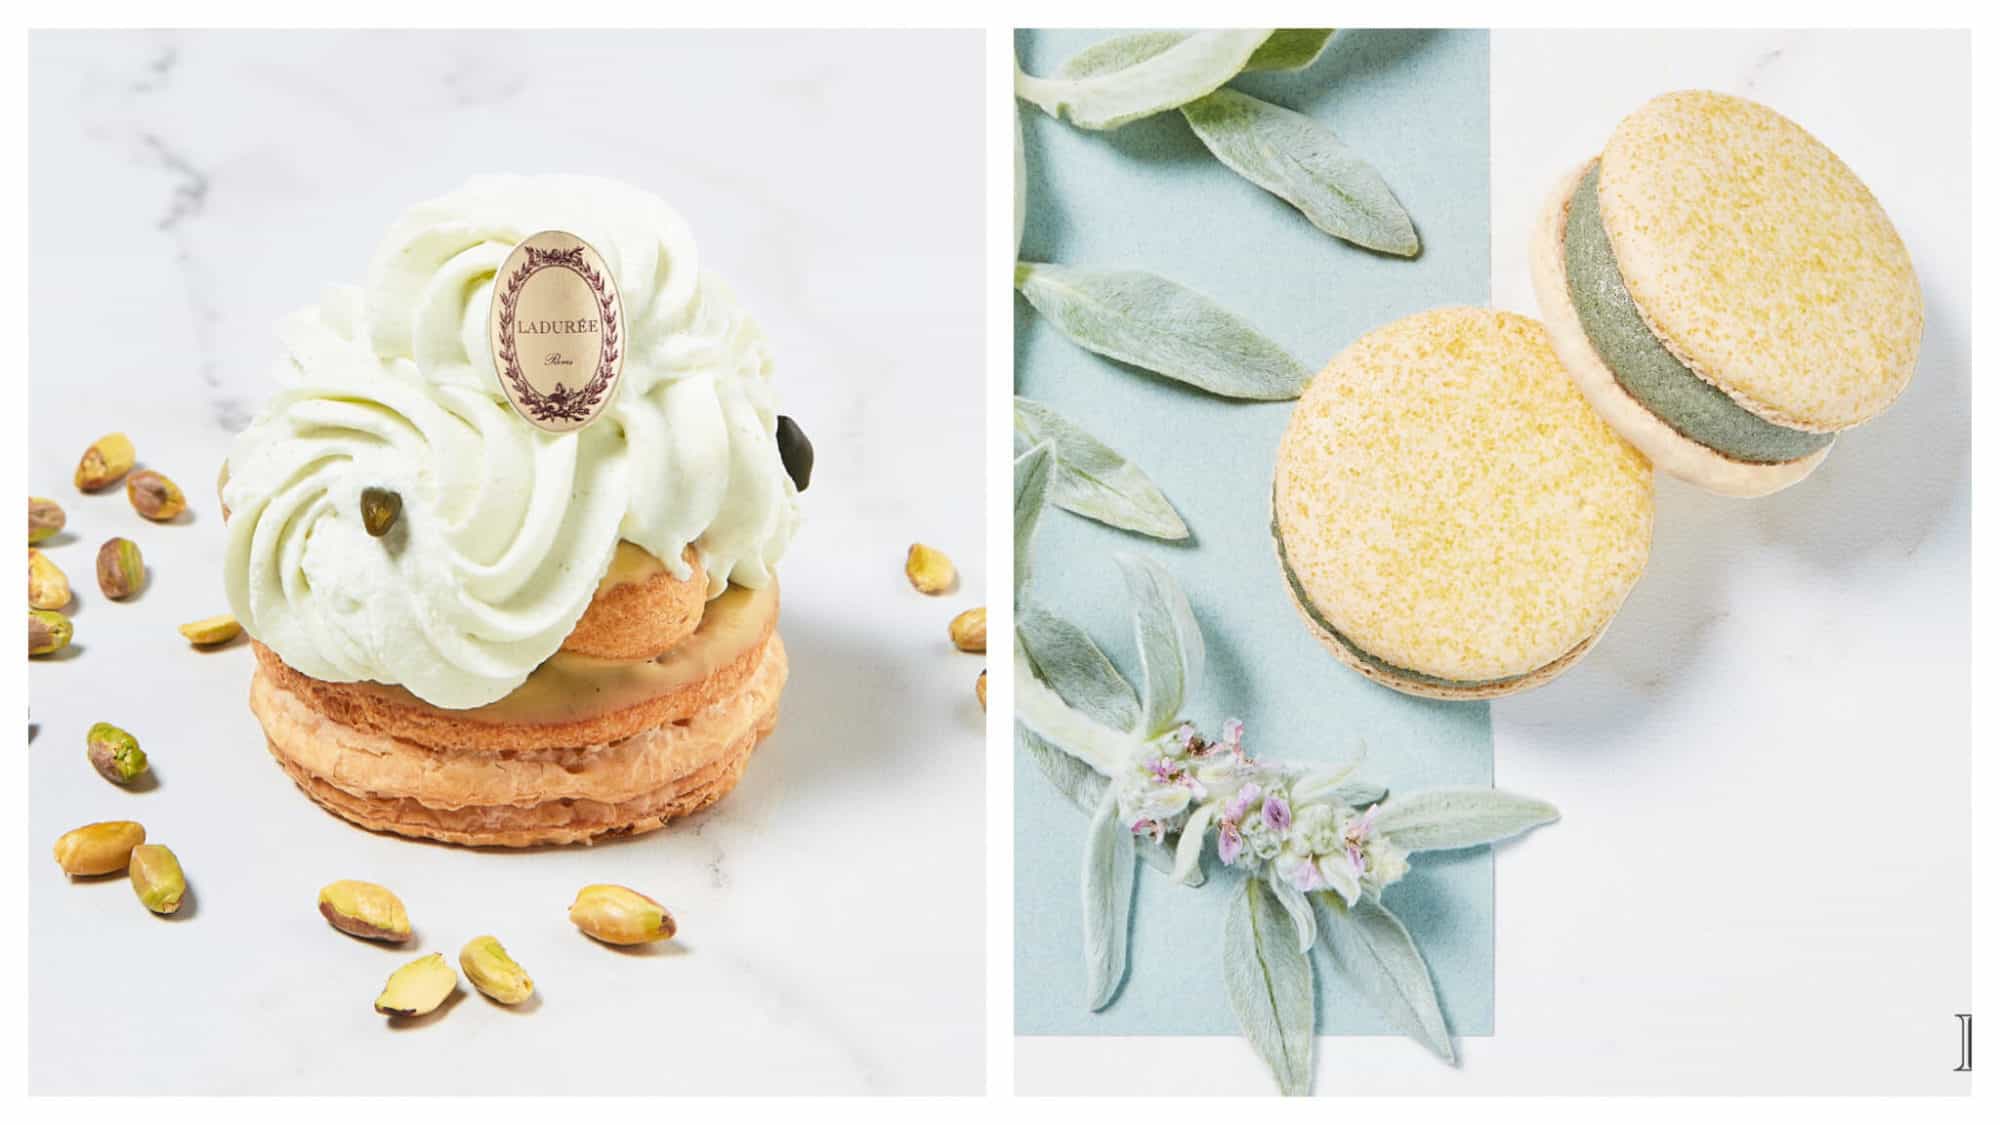 A pistachio pastry and green apple spirulina mint iced macarons from Ladurée